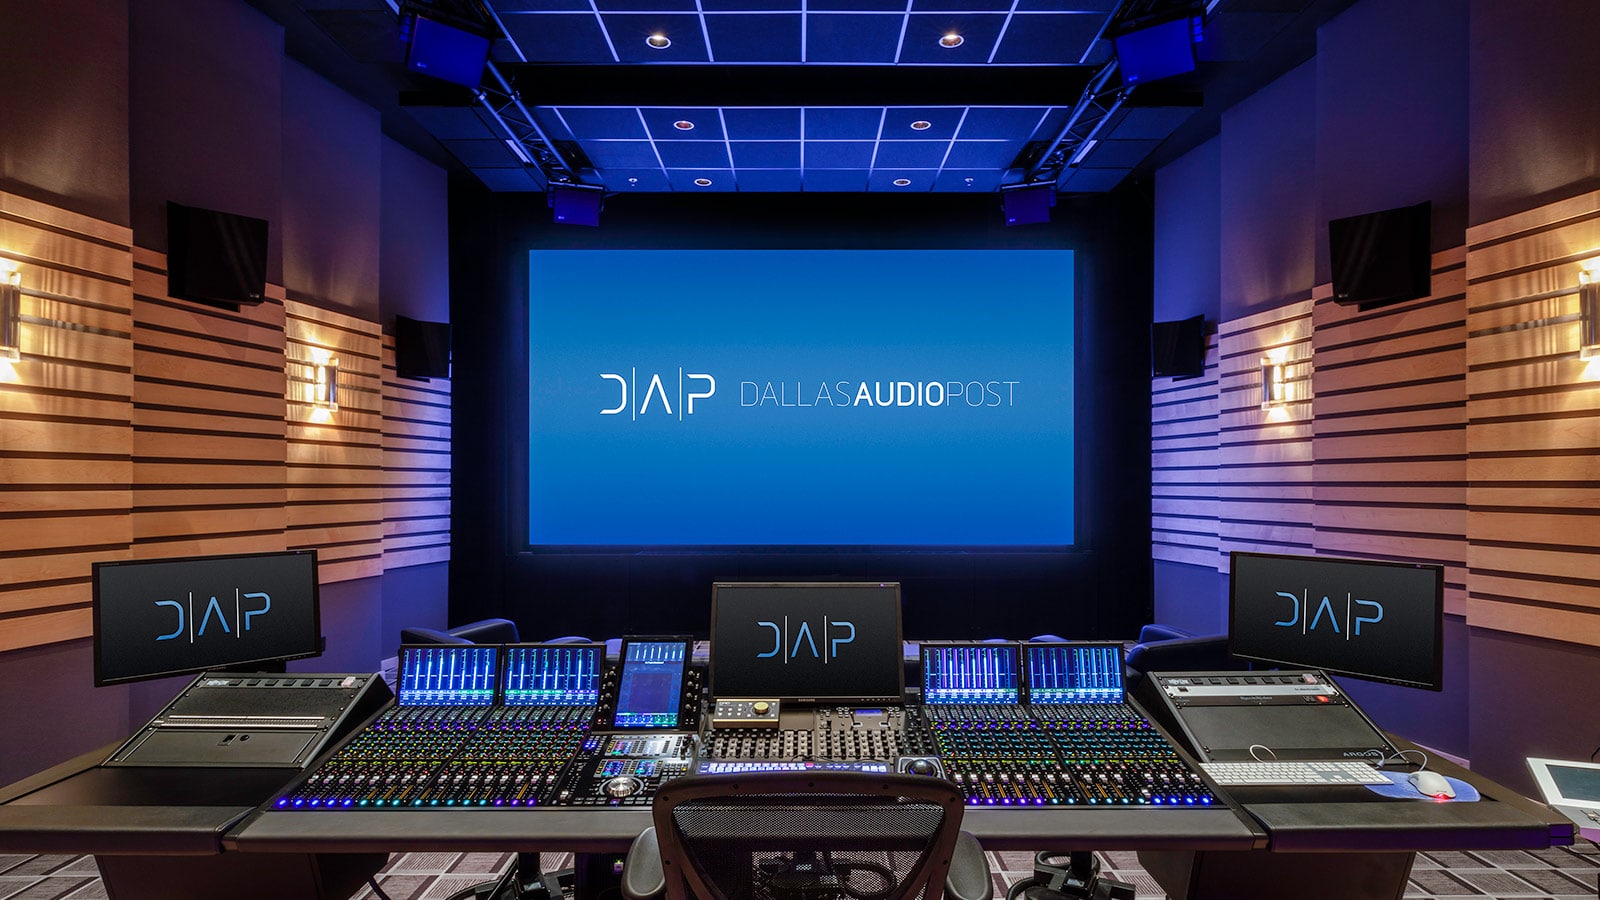 Meyer Sound System Provides Full Immersion in “Double Duty” Atmos Room at Dallas Audio Post